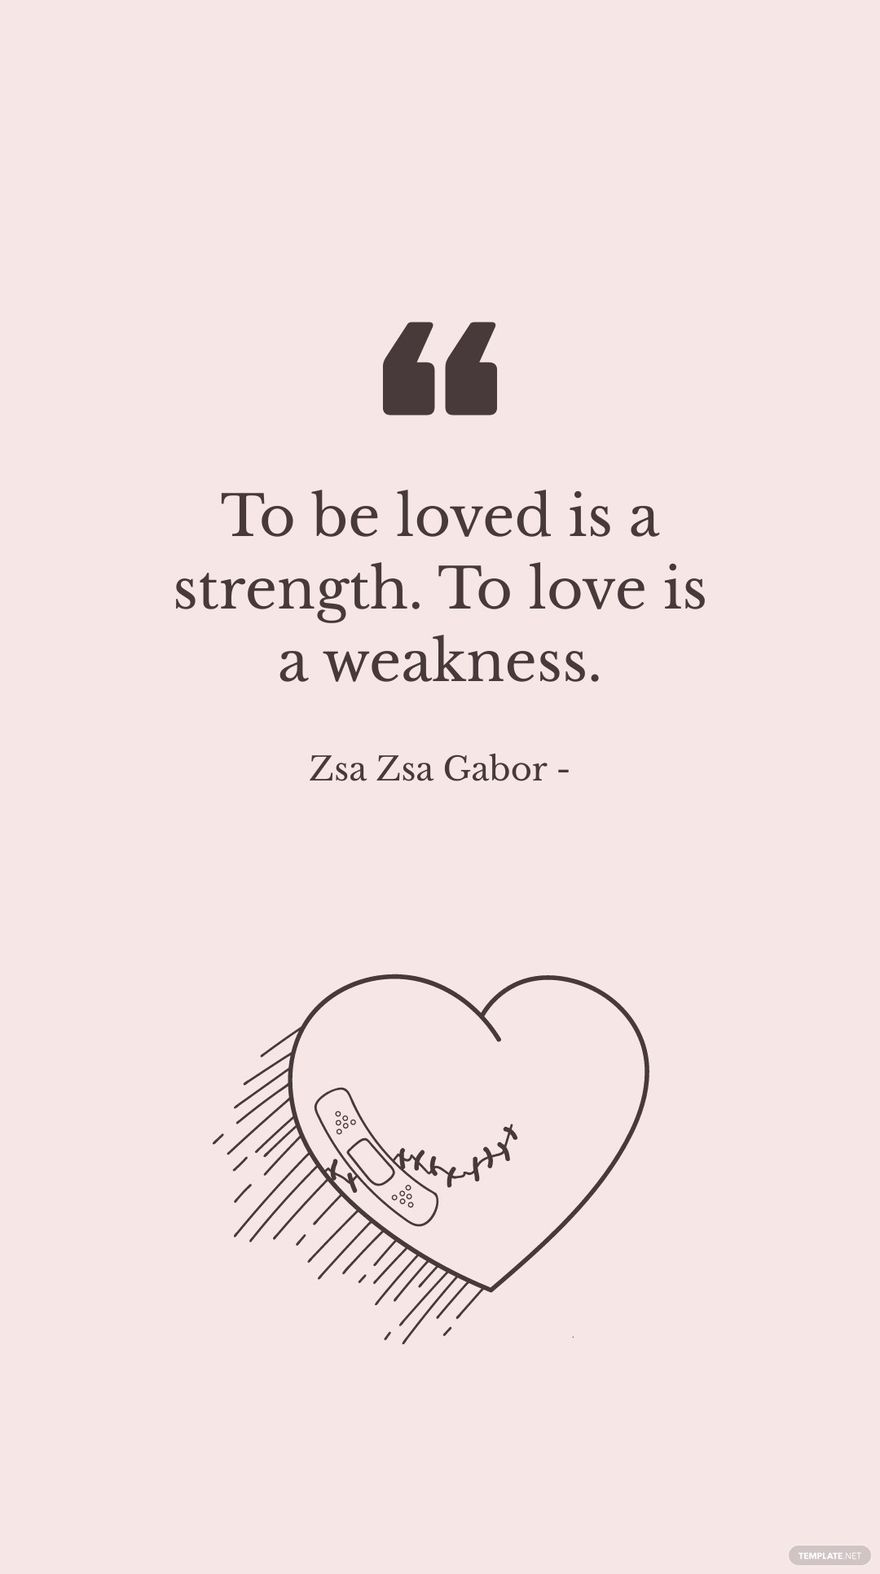 Zsa Zsa Gabor - To be loved is a strength. To love is a weakness.